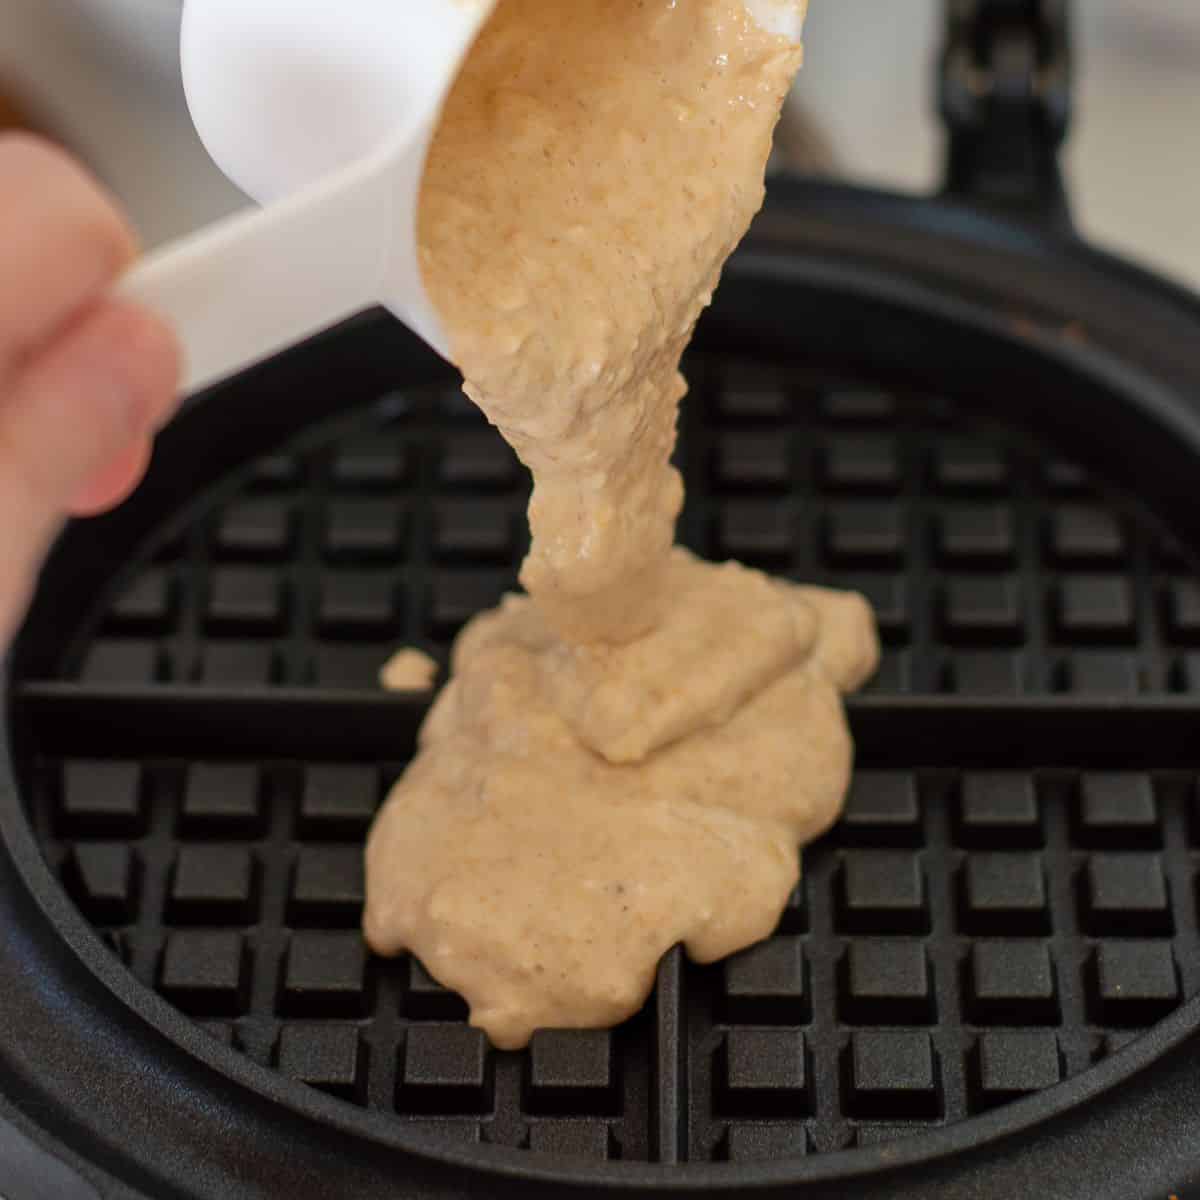 Batter poured into a waffle iron.